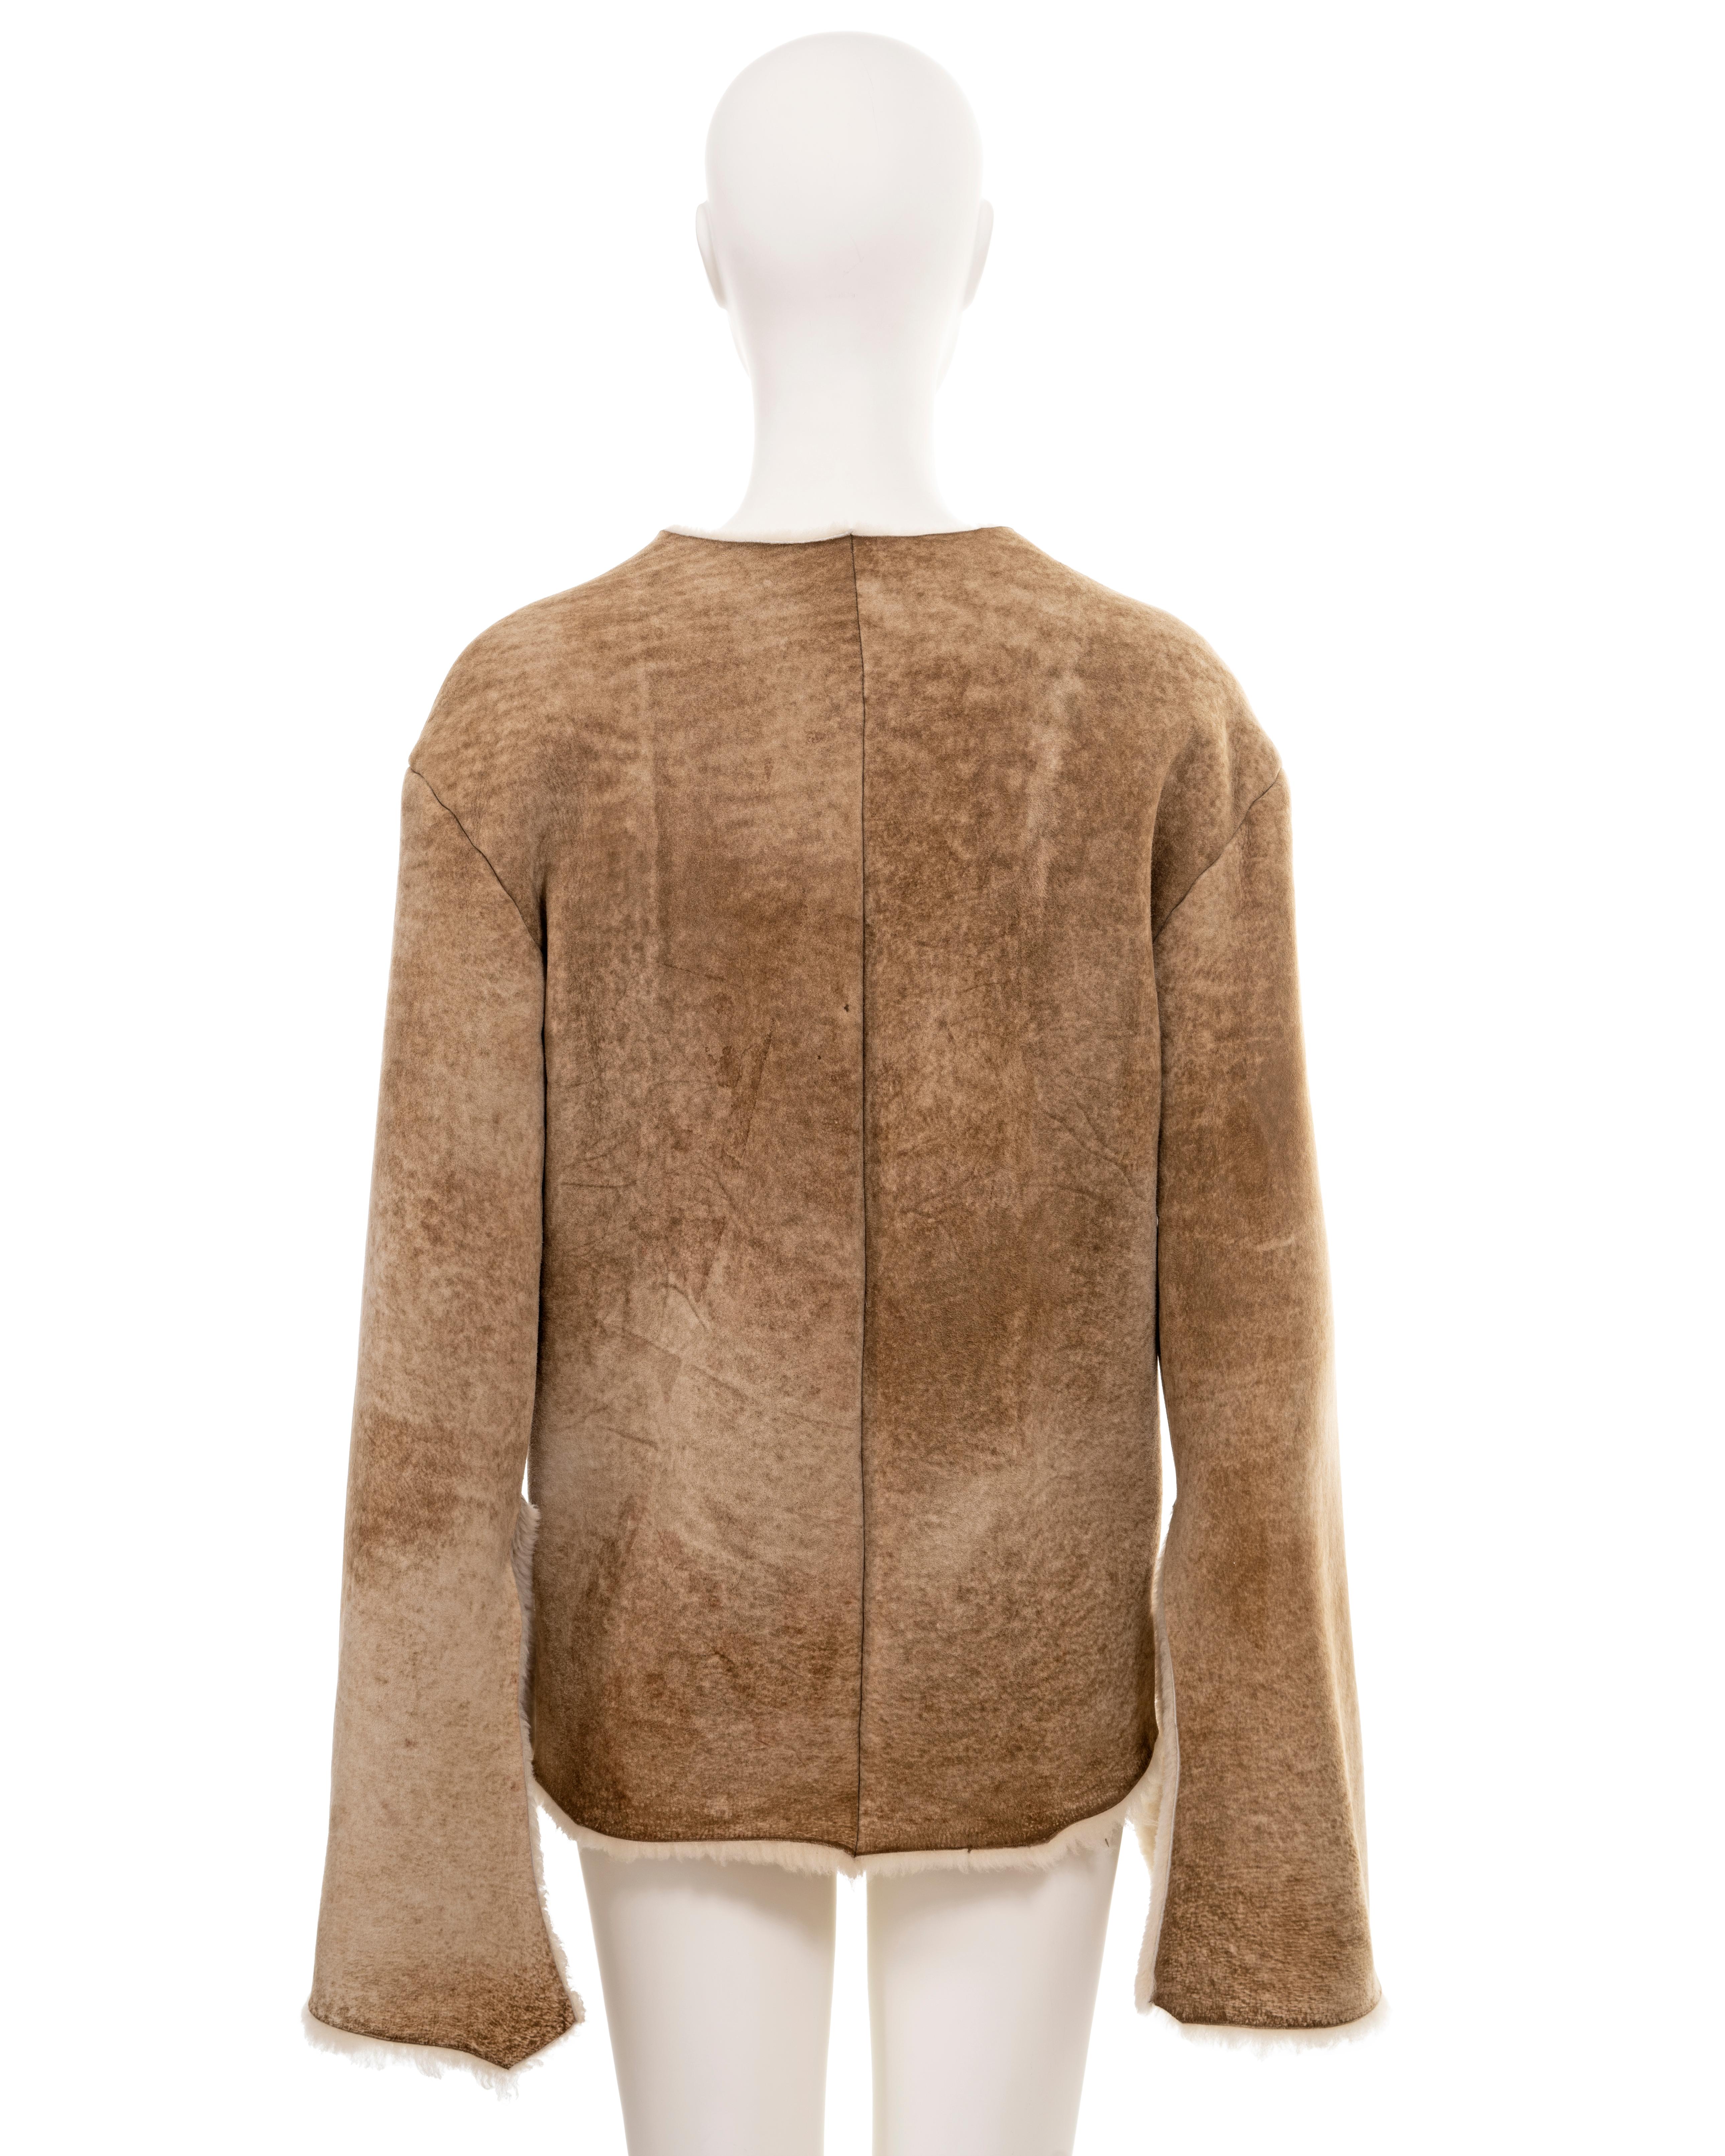 Ruffo Research by A.F. Vandevorst shearling pullover sweater, fw 2000 For Sale 5